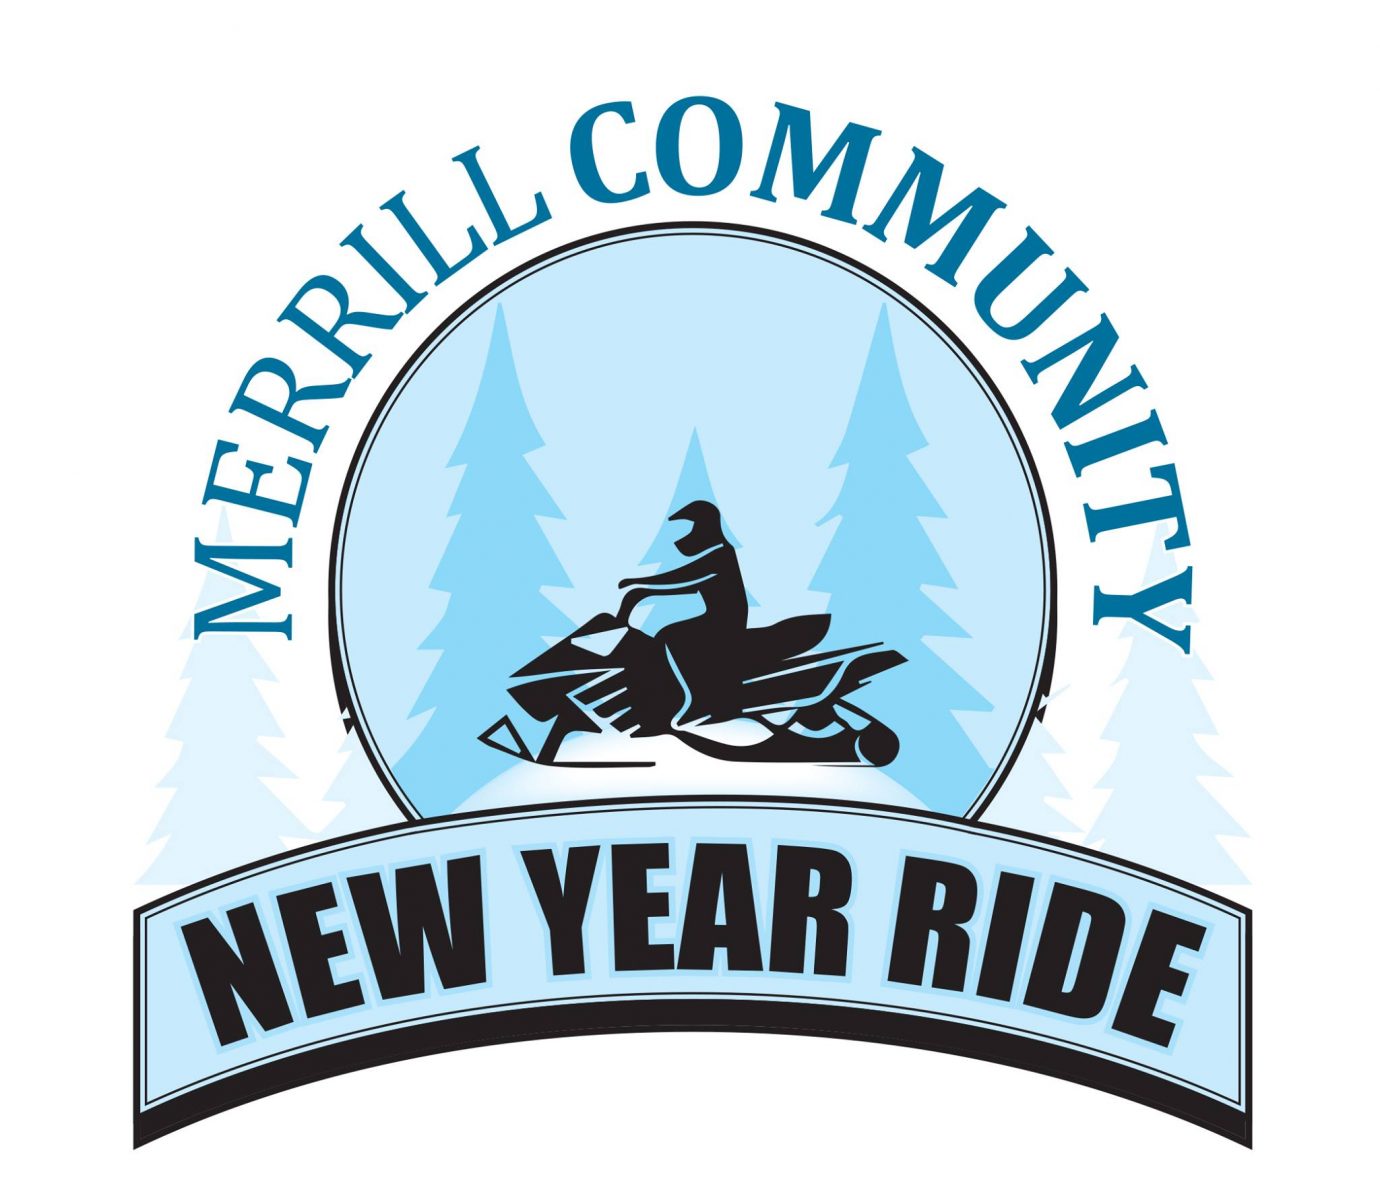 New Year Ride accepting fundraising recipient applications